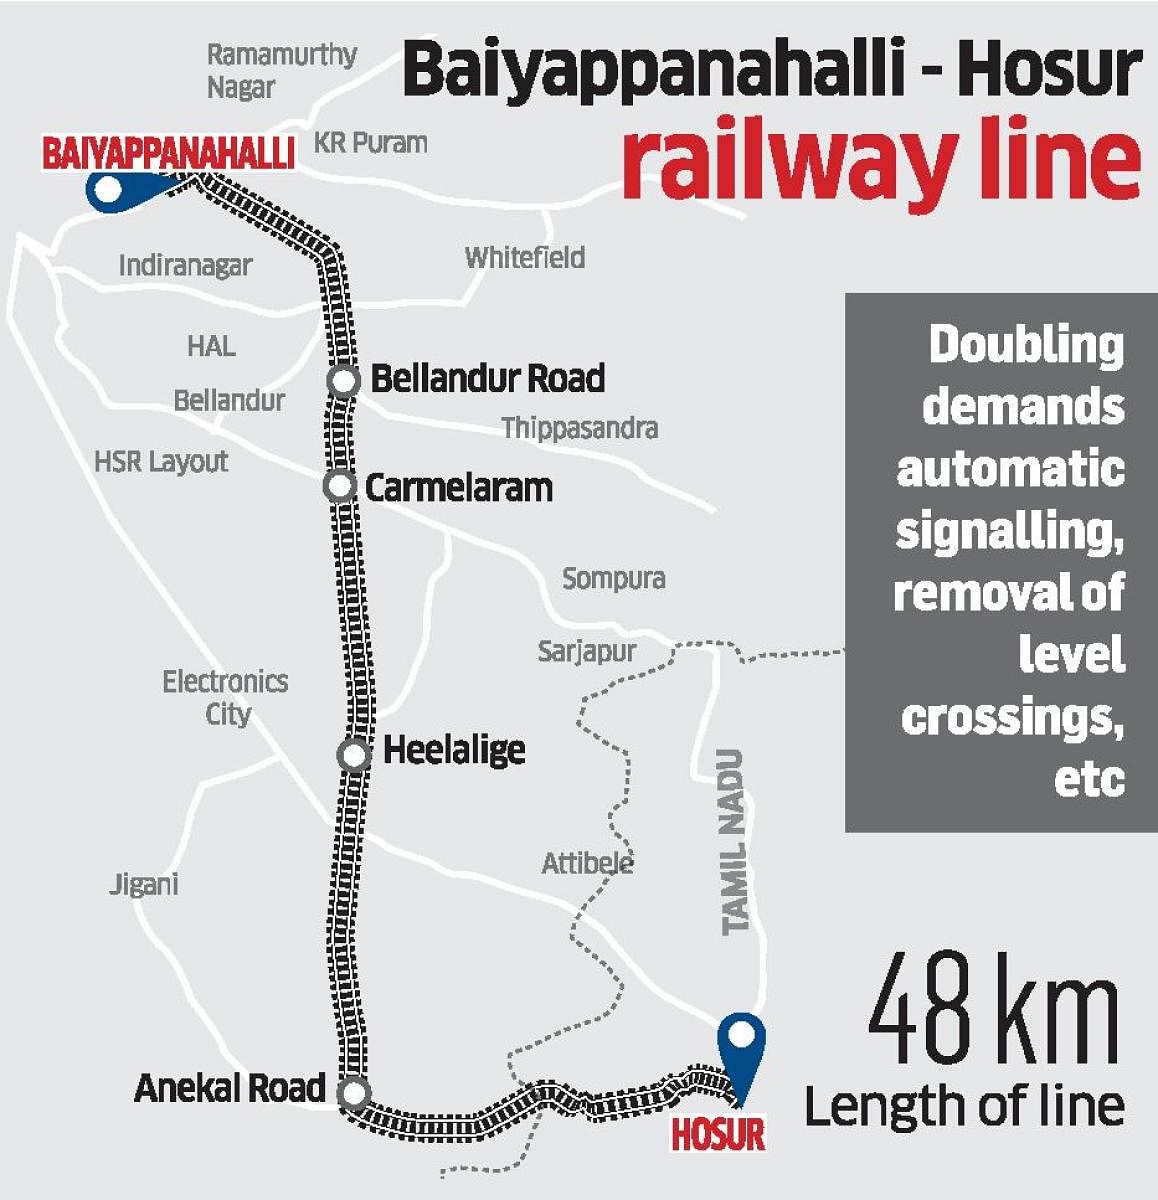 Enhanced capacity of the Hosur line could help the railways introduce more trains towards Kerala and Tamil Nadu from the Baiyappanahalli terminal.